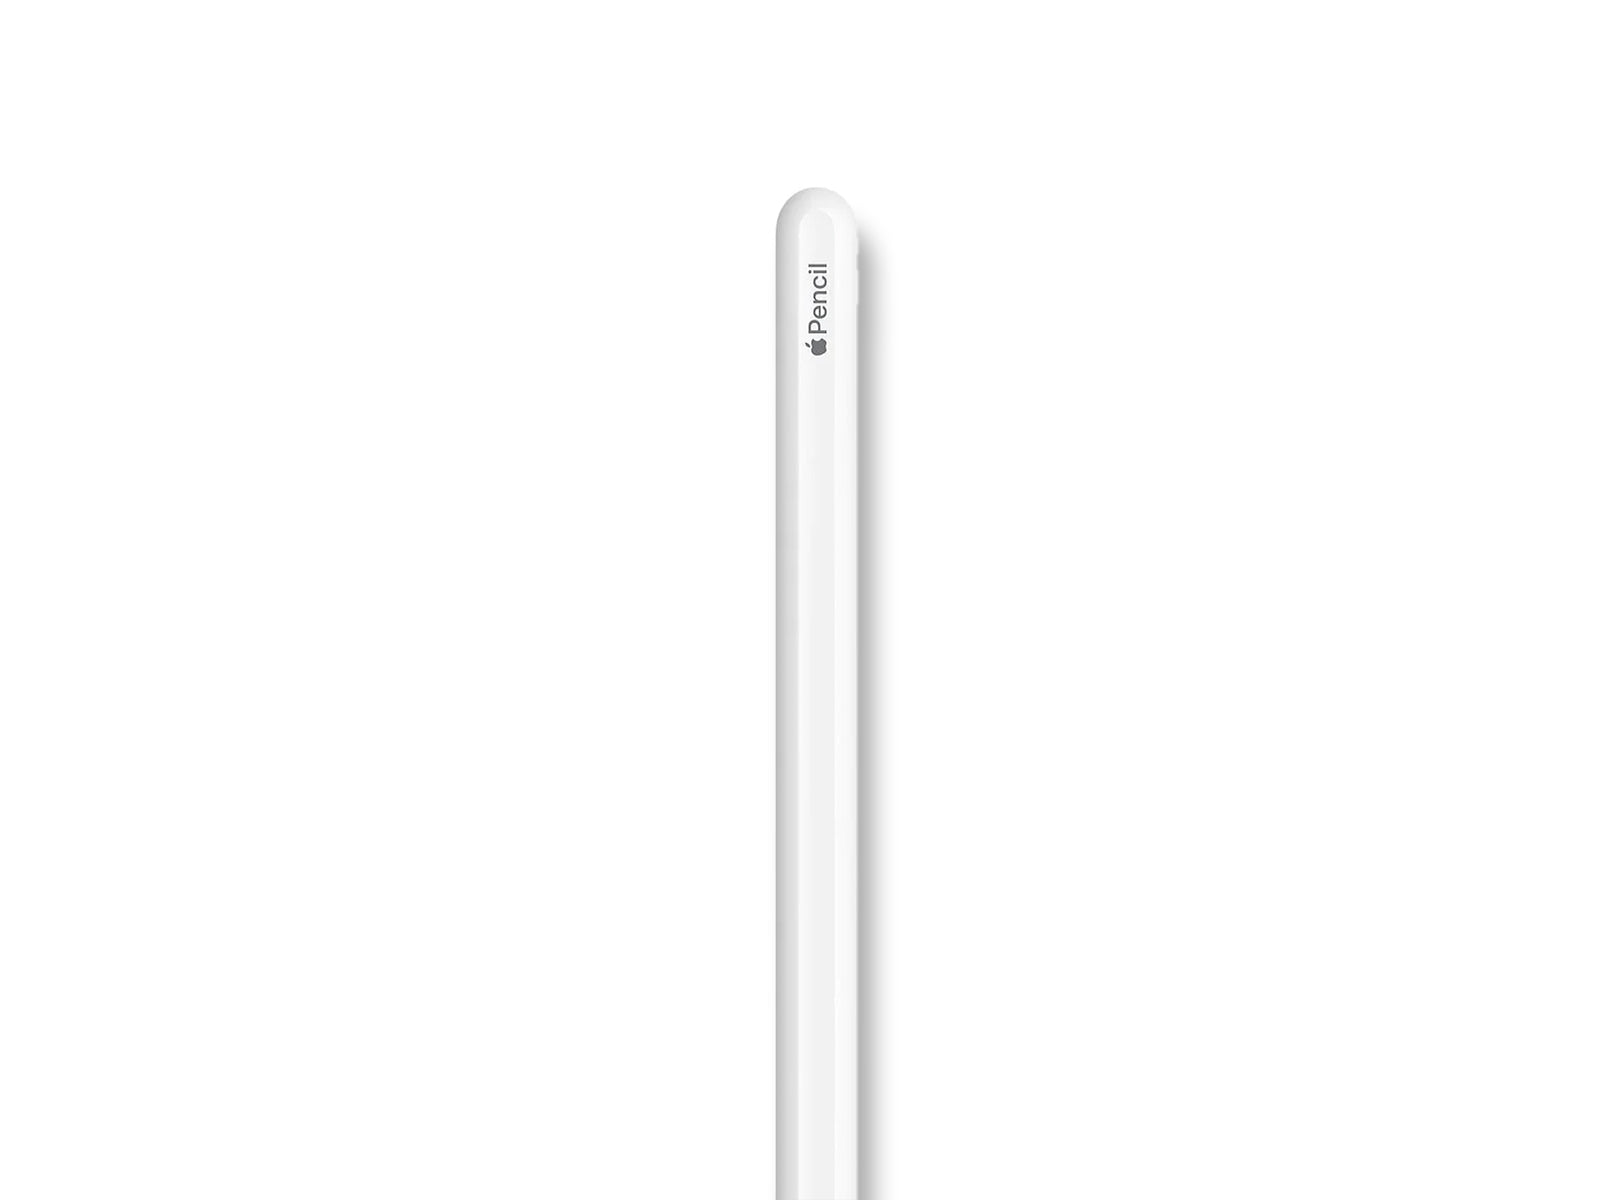  Apple Pencil 2nd Generation Showing Apple Logo at The End Tip 